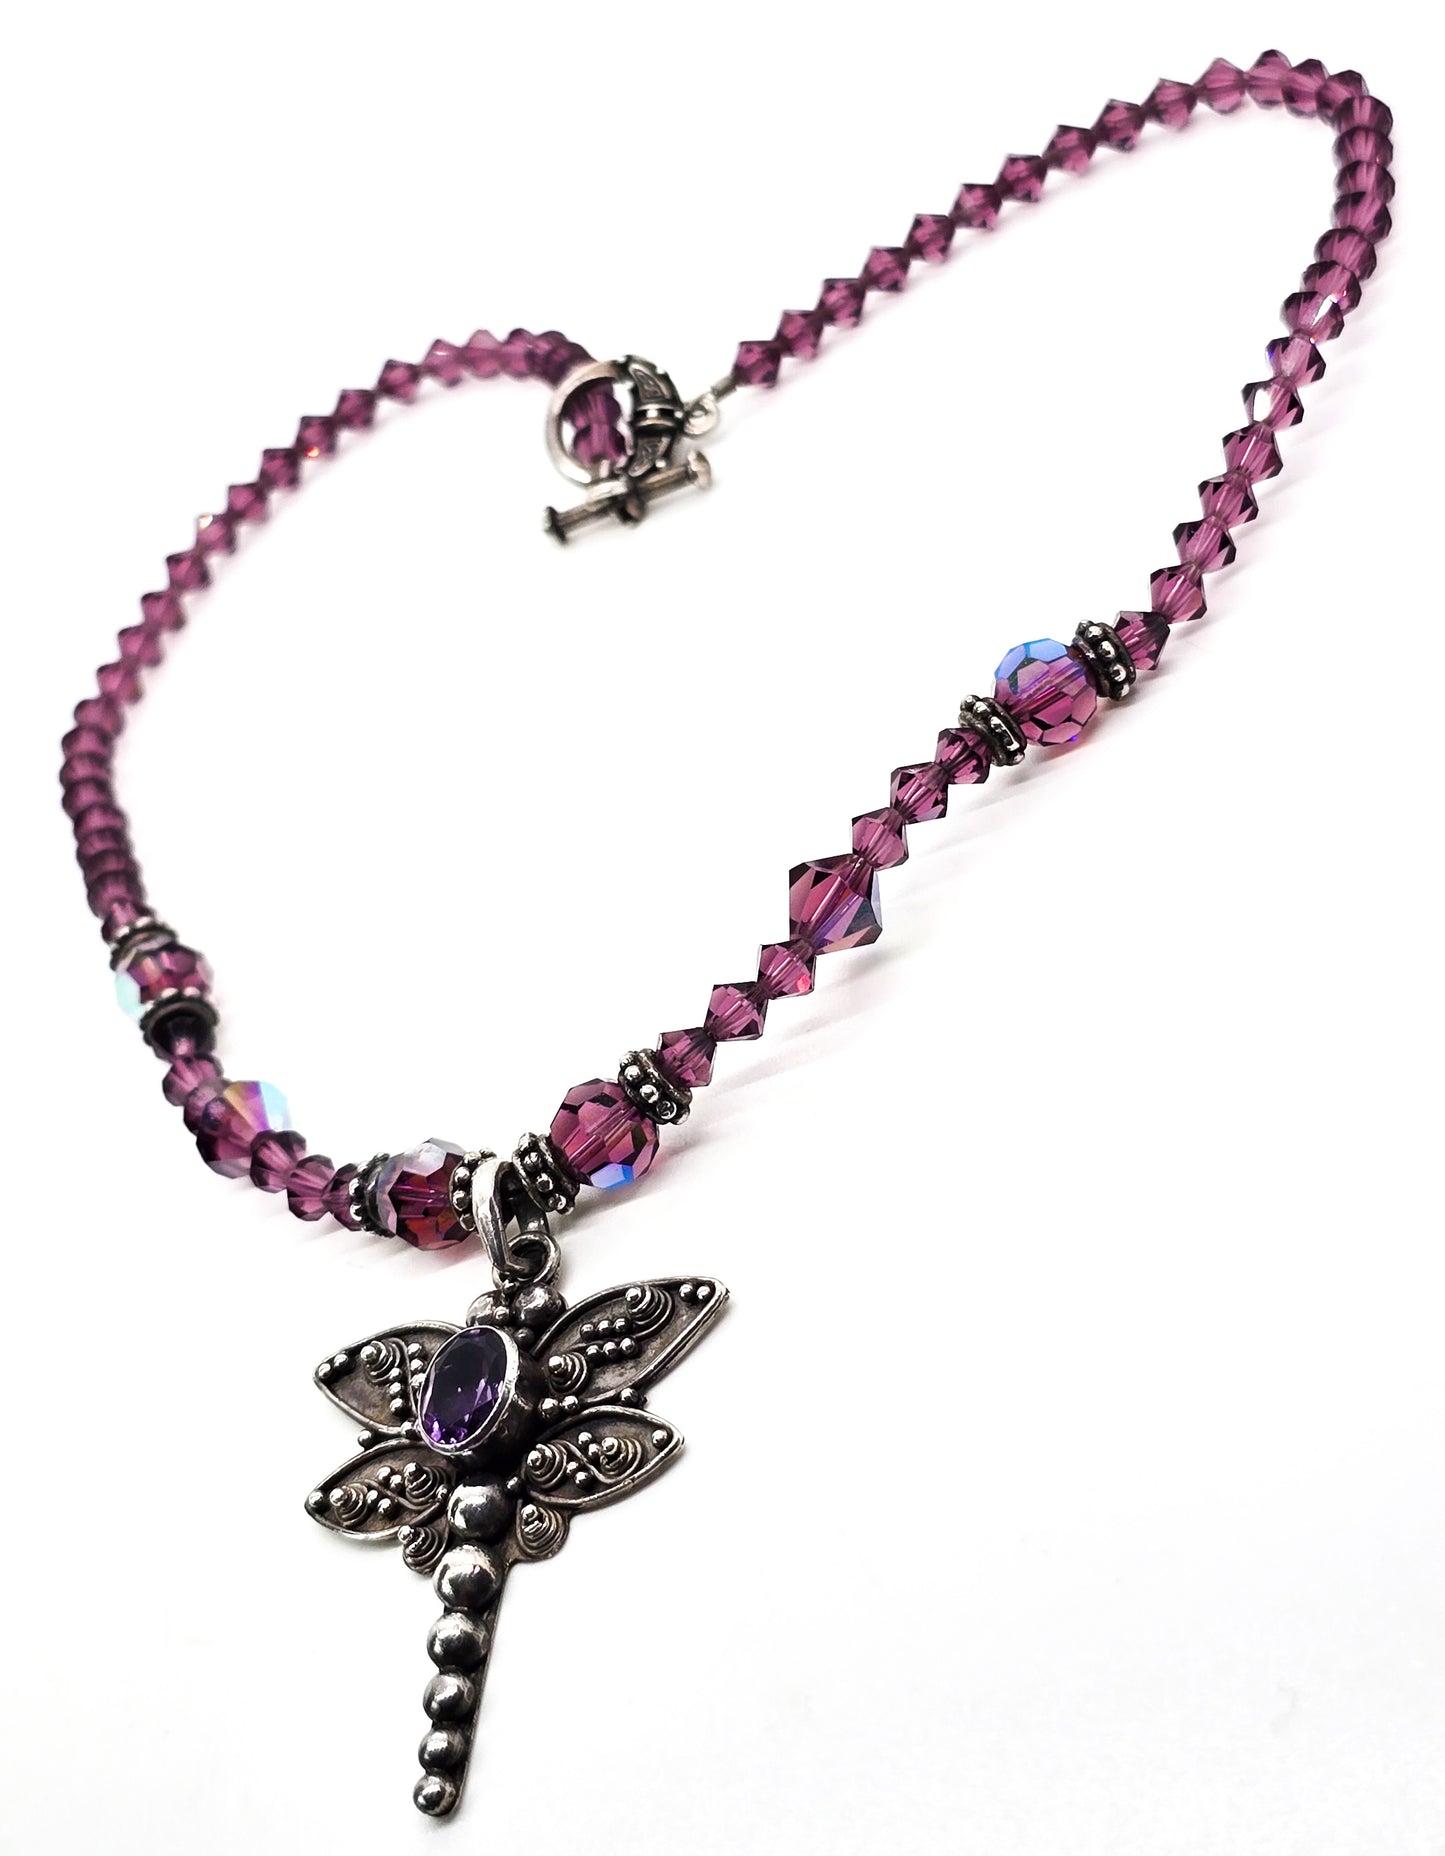 Dragonfly Amethyst tribal sterling silver and Swarovski crystal toggle clasp necklace